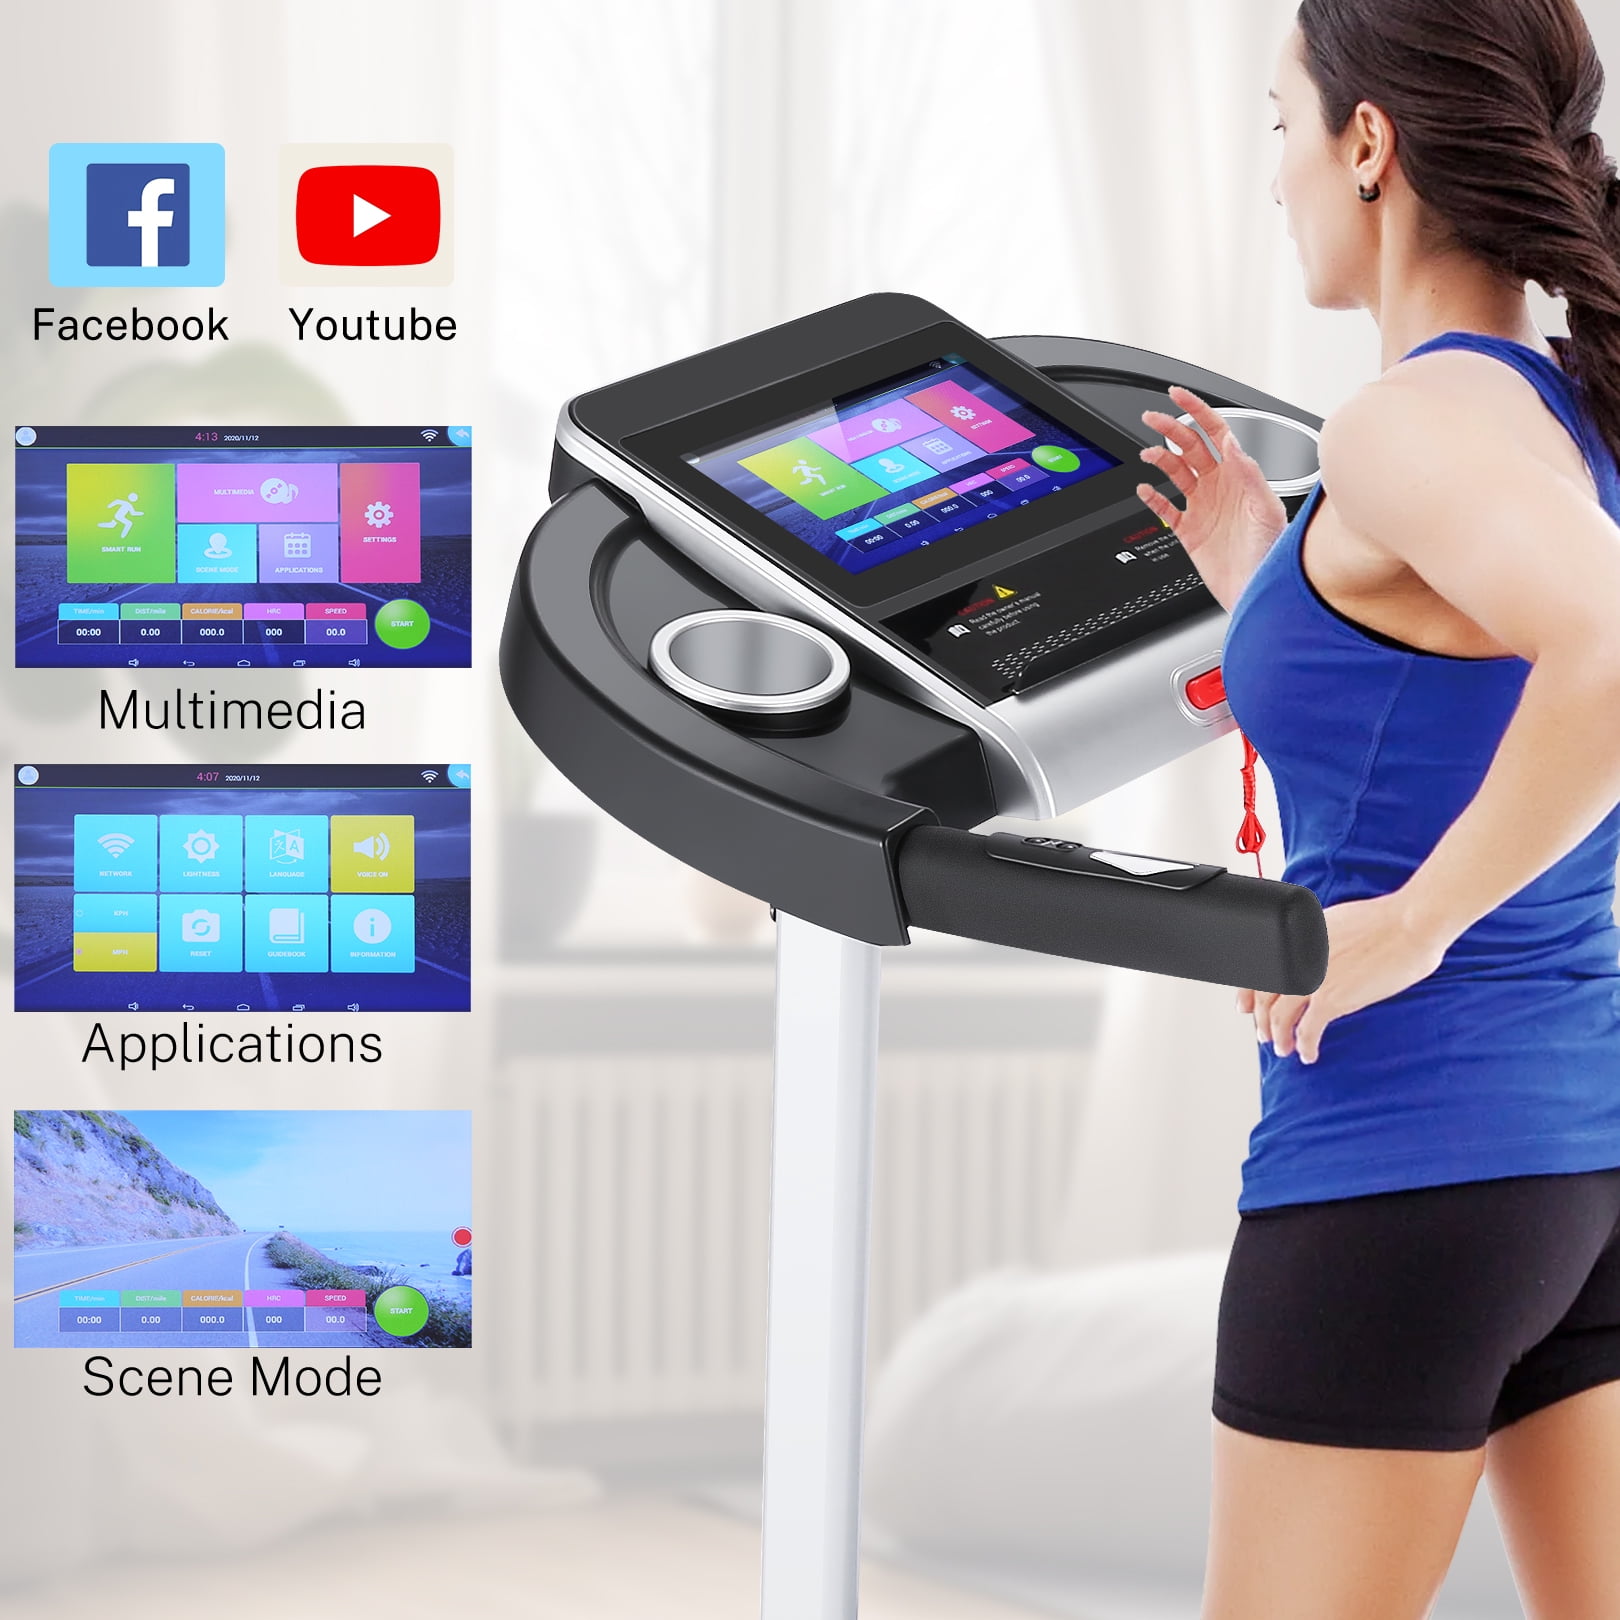 ADNOOM 3.25HP Treadmill with 10" HD TV Movie Touchscreen and 3D Virtual Sports Scene, Folding Running Machine for Home with Incline, WiFi Connection, Bluetooth Speakers, YouTube